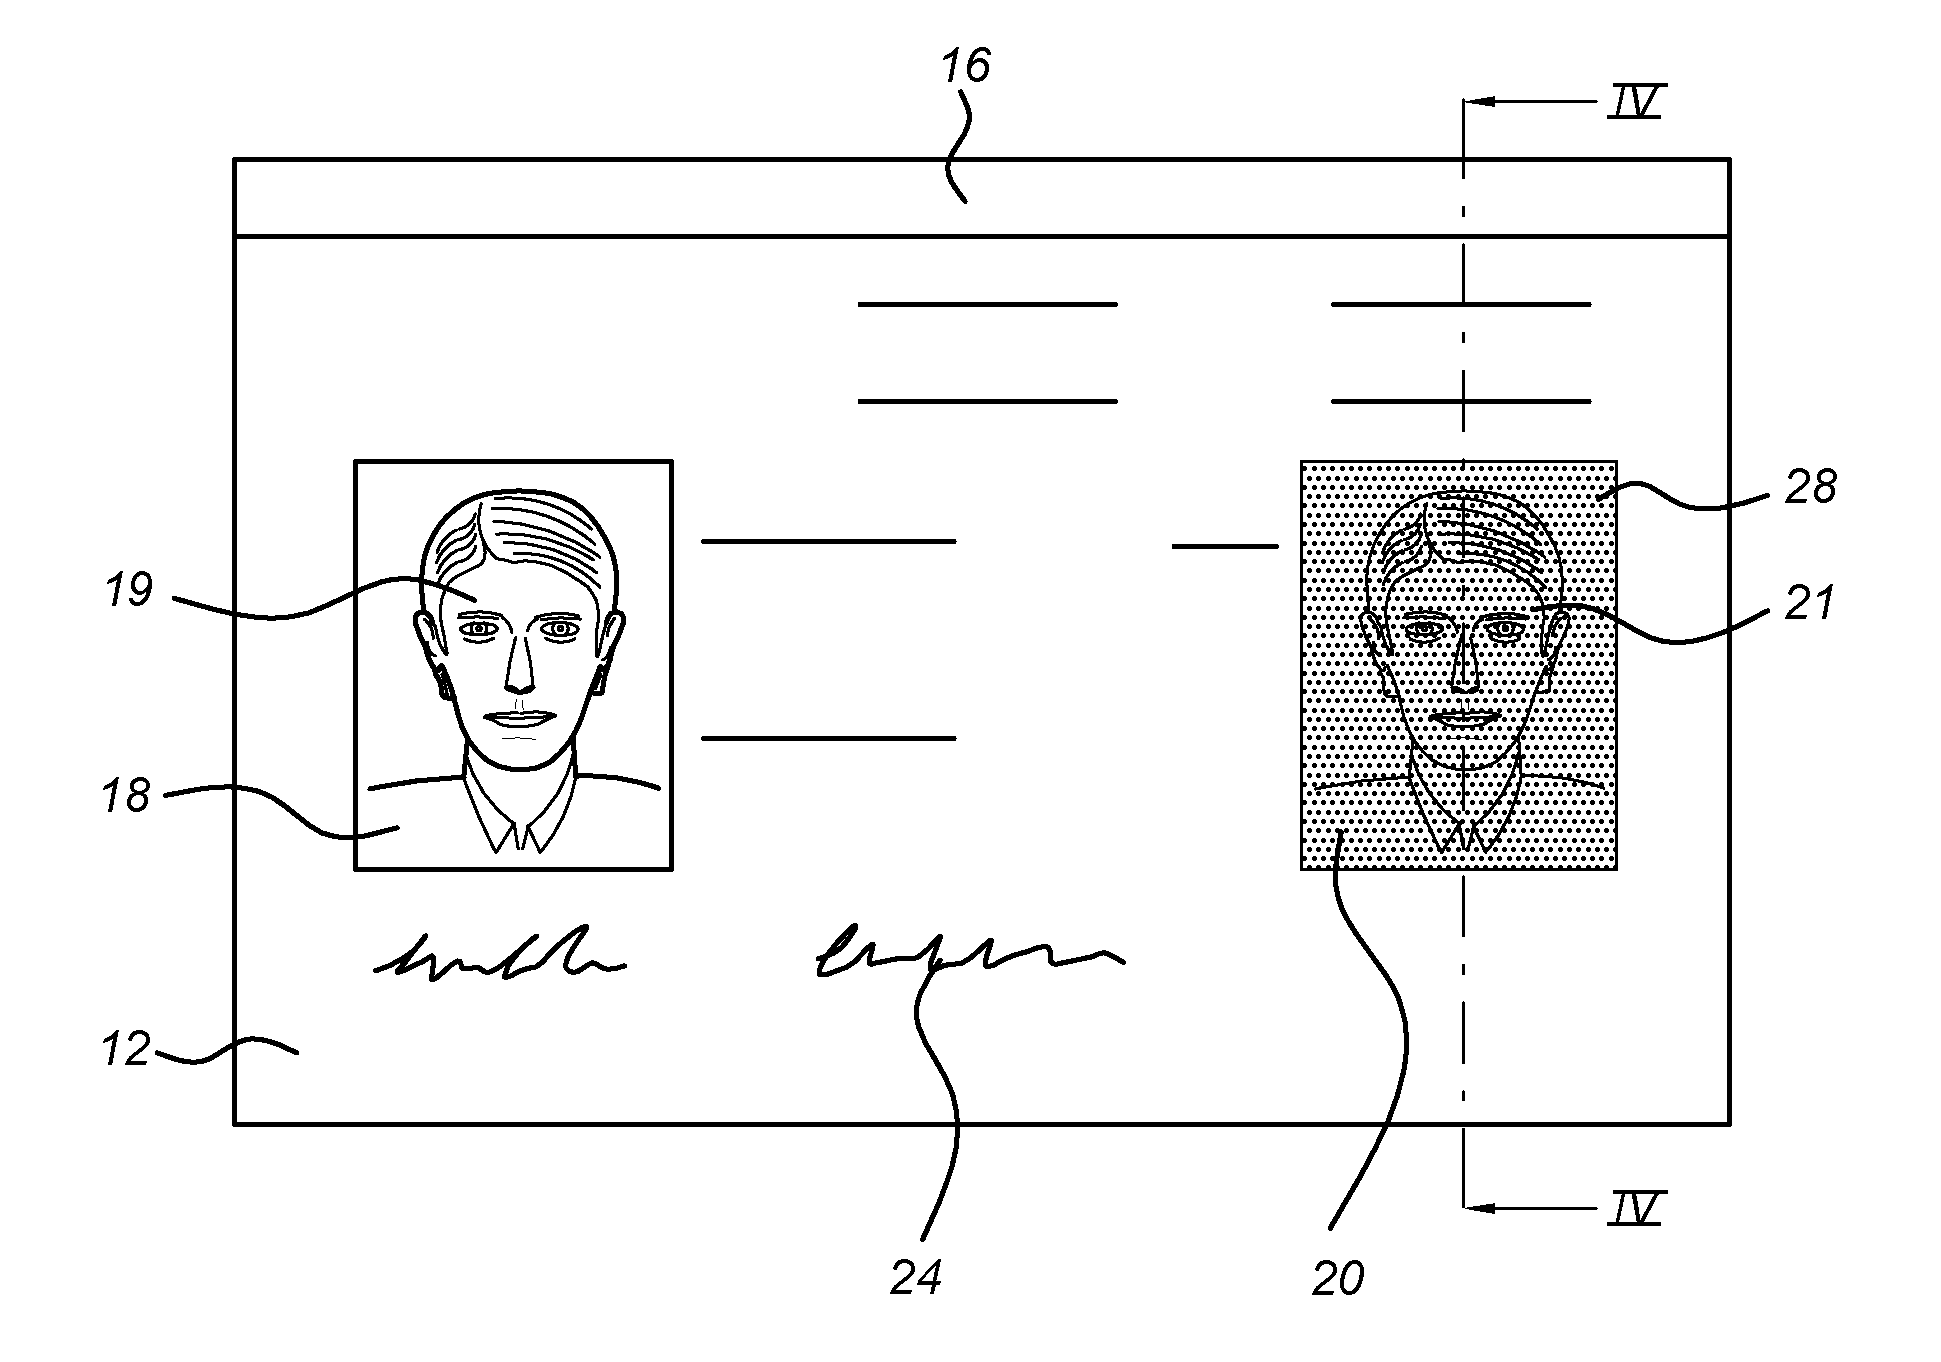 Identification assembly for an identity document